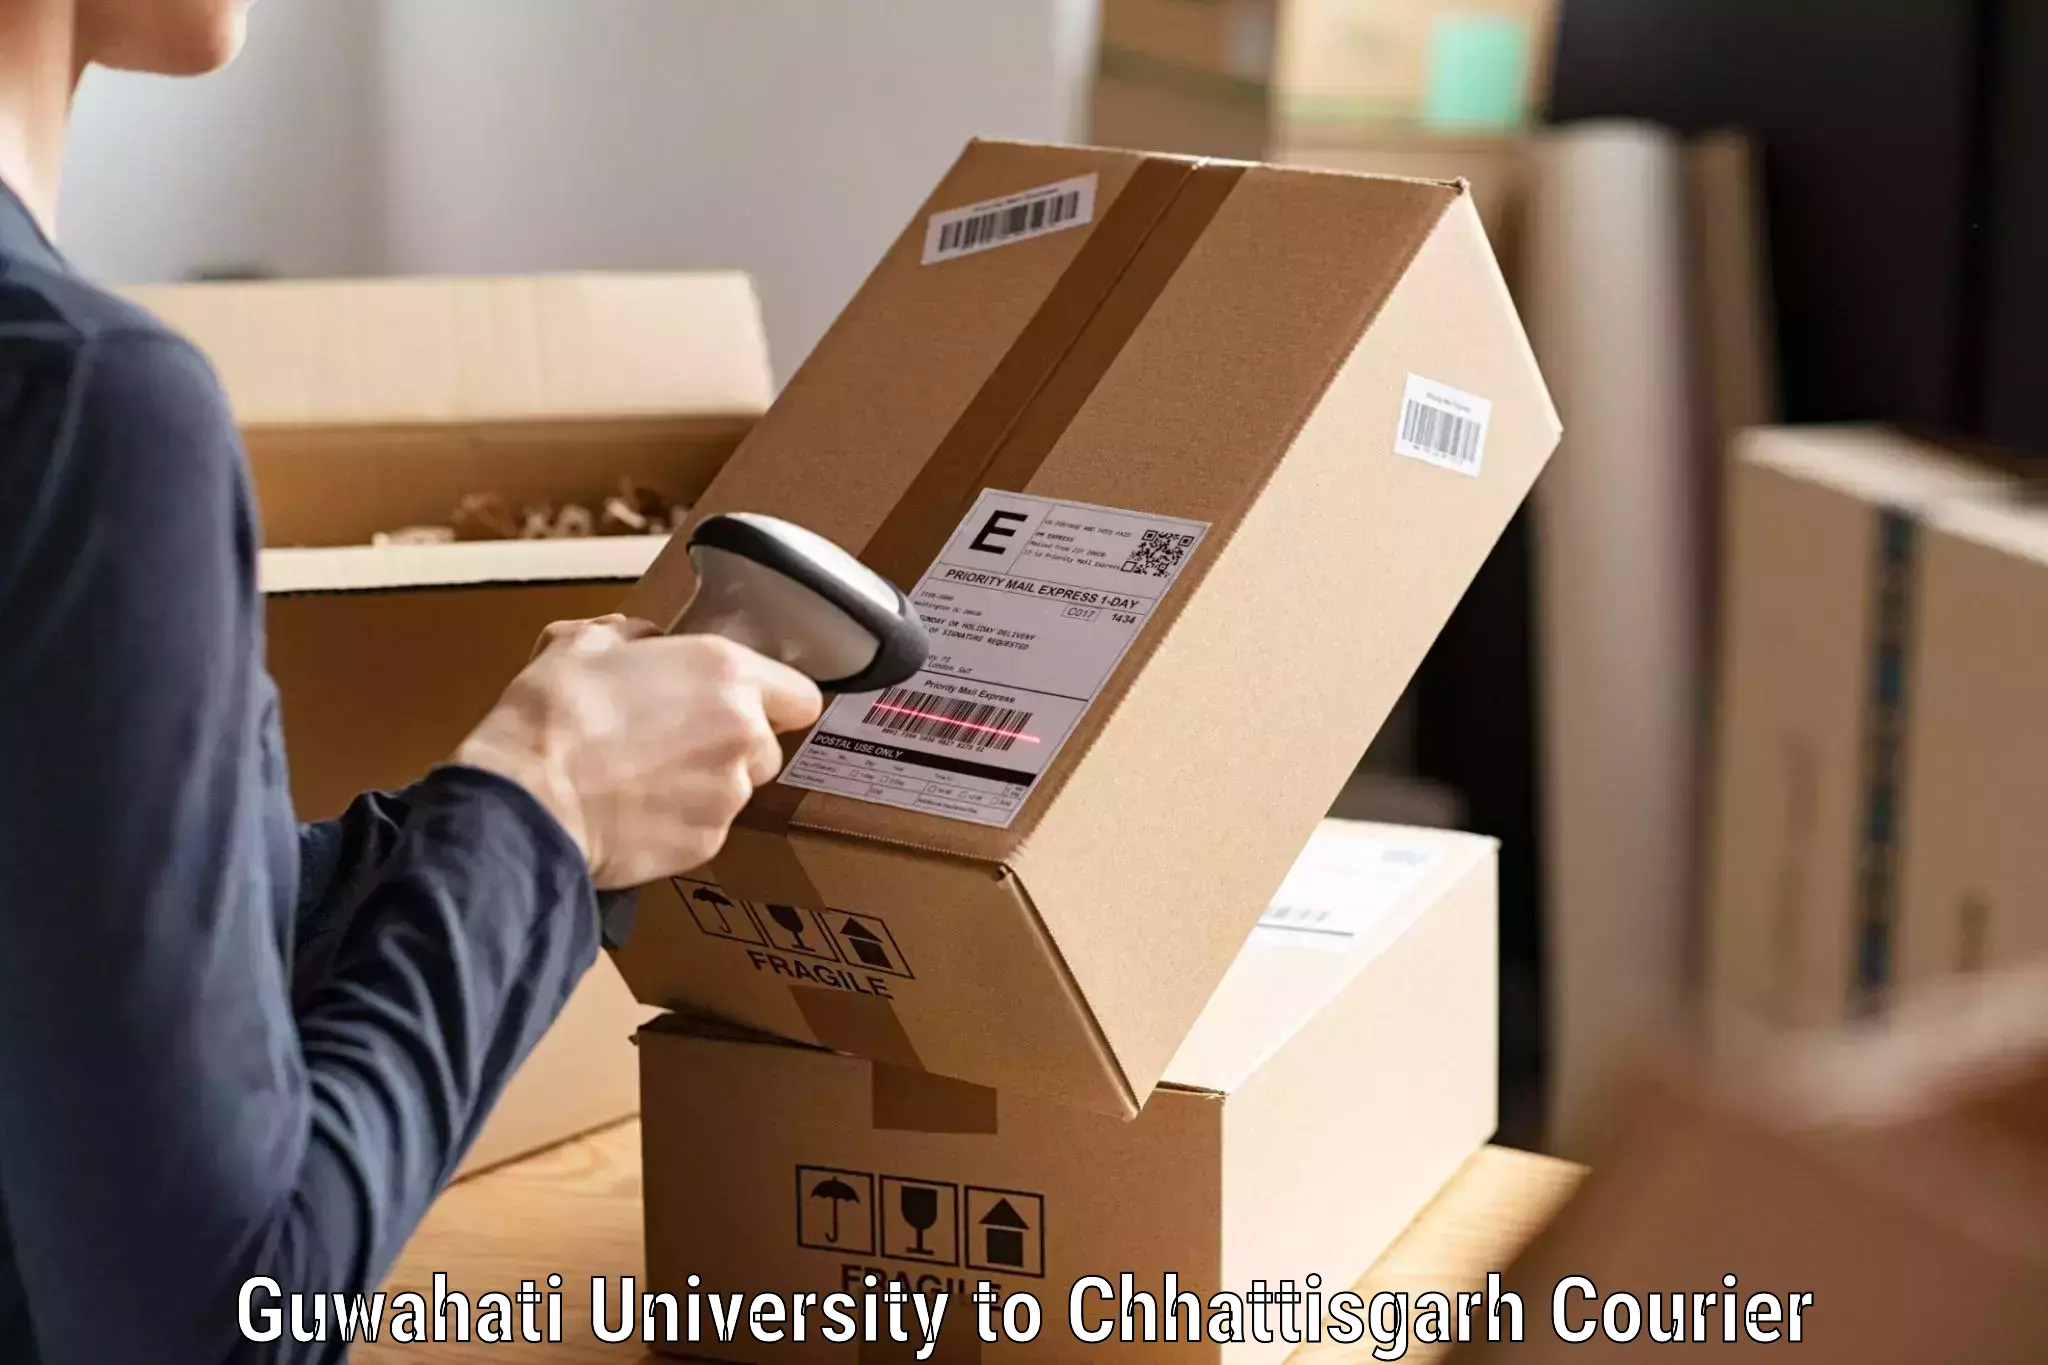 Personal parcel delivery in Guwahati University to Sakti